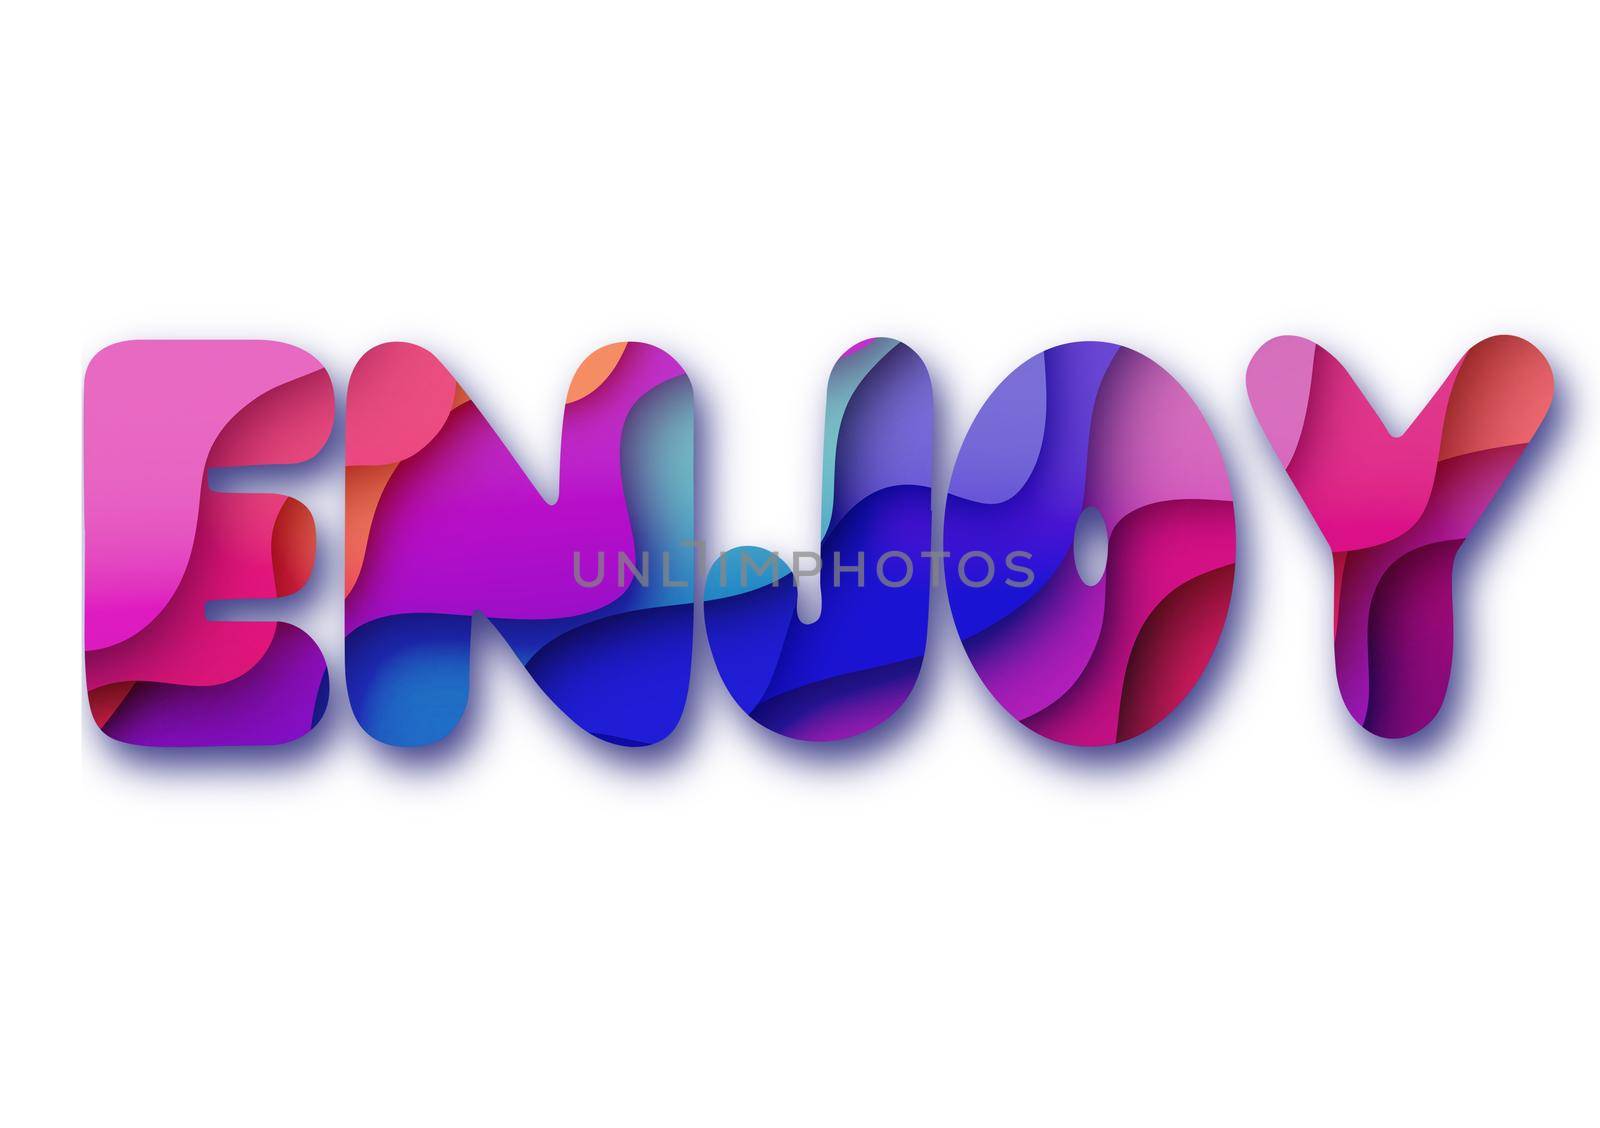 Enjoy colourful lettering design. Enjoy text print for apparel and gifts. Text design other paper cut effect. by iliris